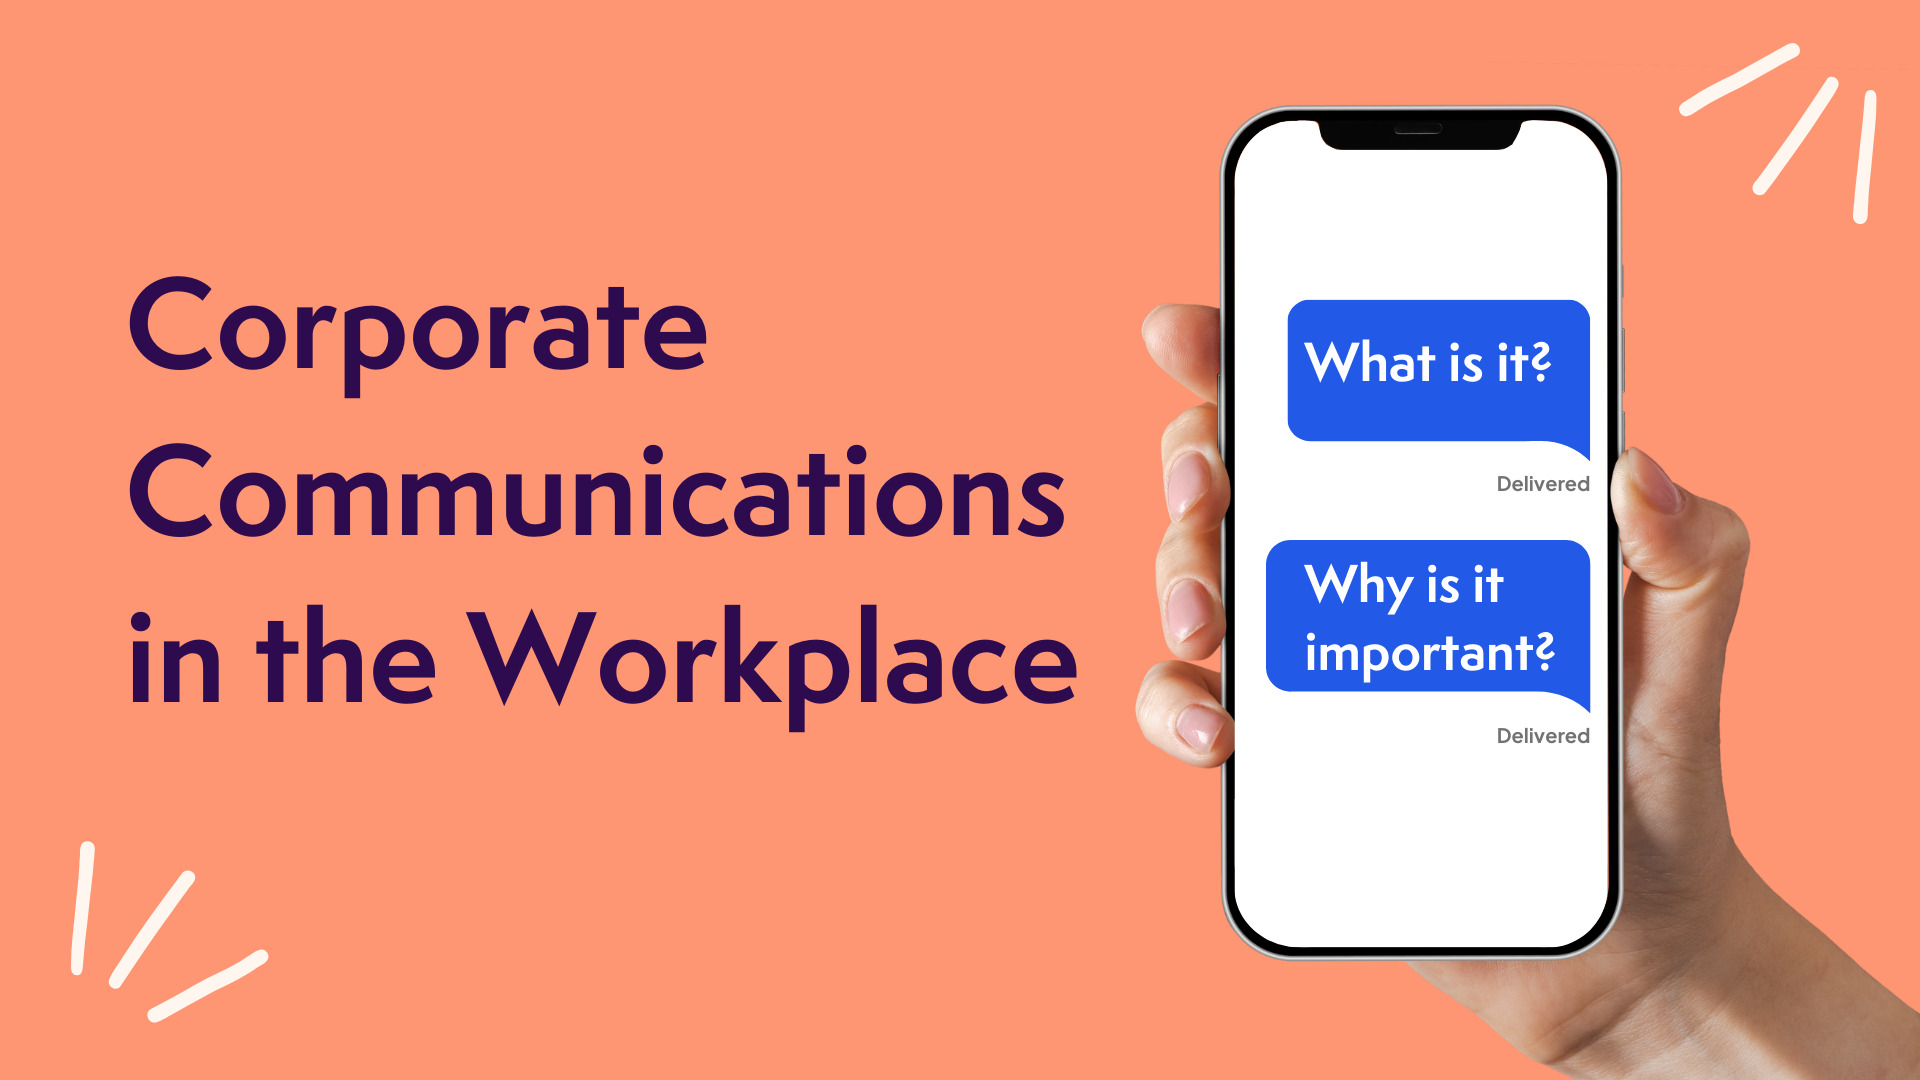 Corporate Communications: What Is It and Why Is It Important?